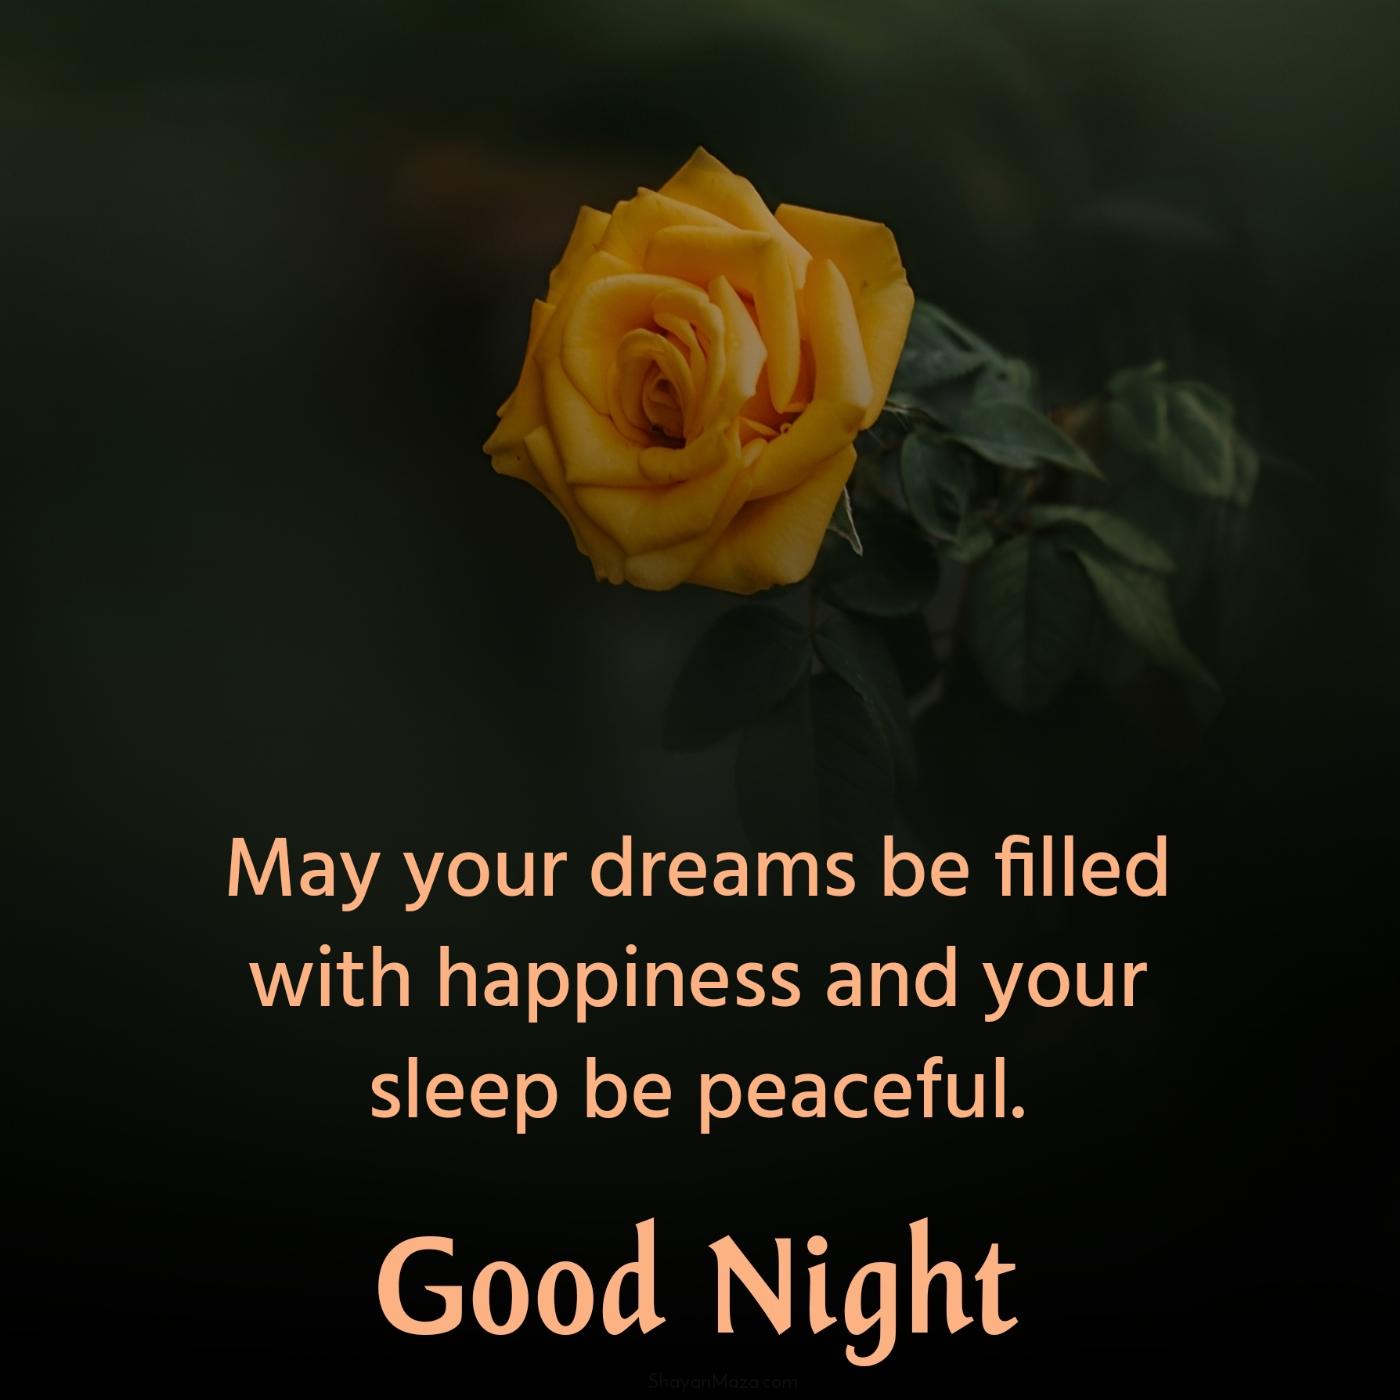 May your dreams be filled with happiness